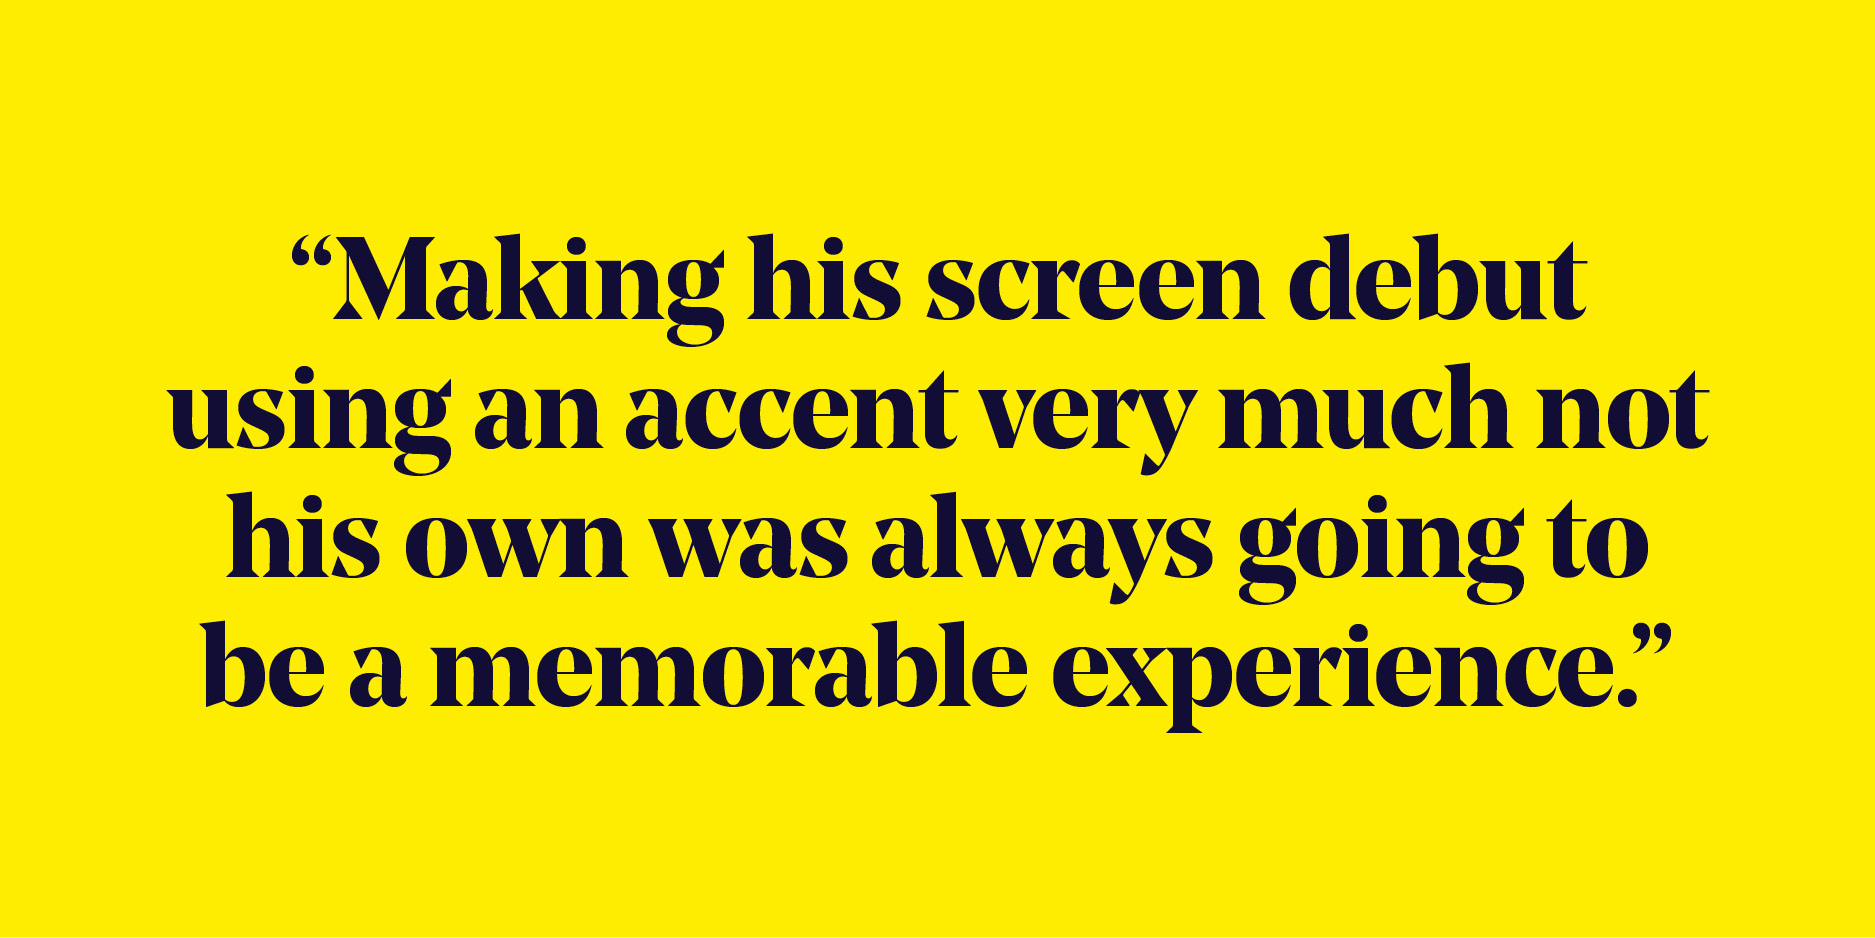 Quote: "Making his screen debut using an accent very much not his own was always going to be a memorable experience."